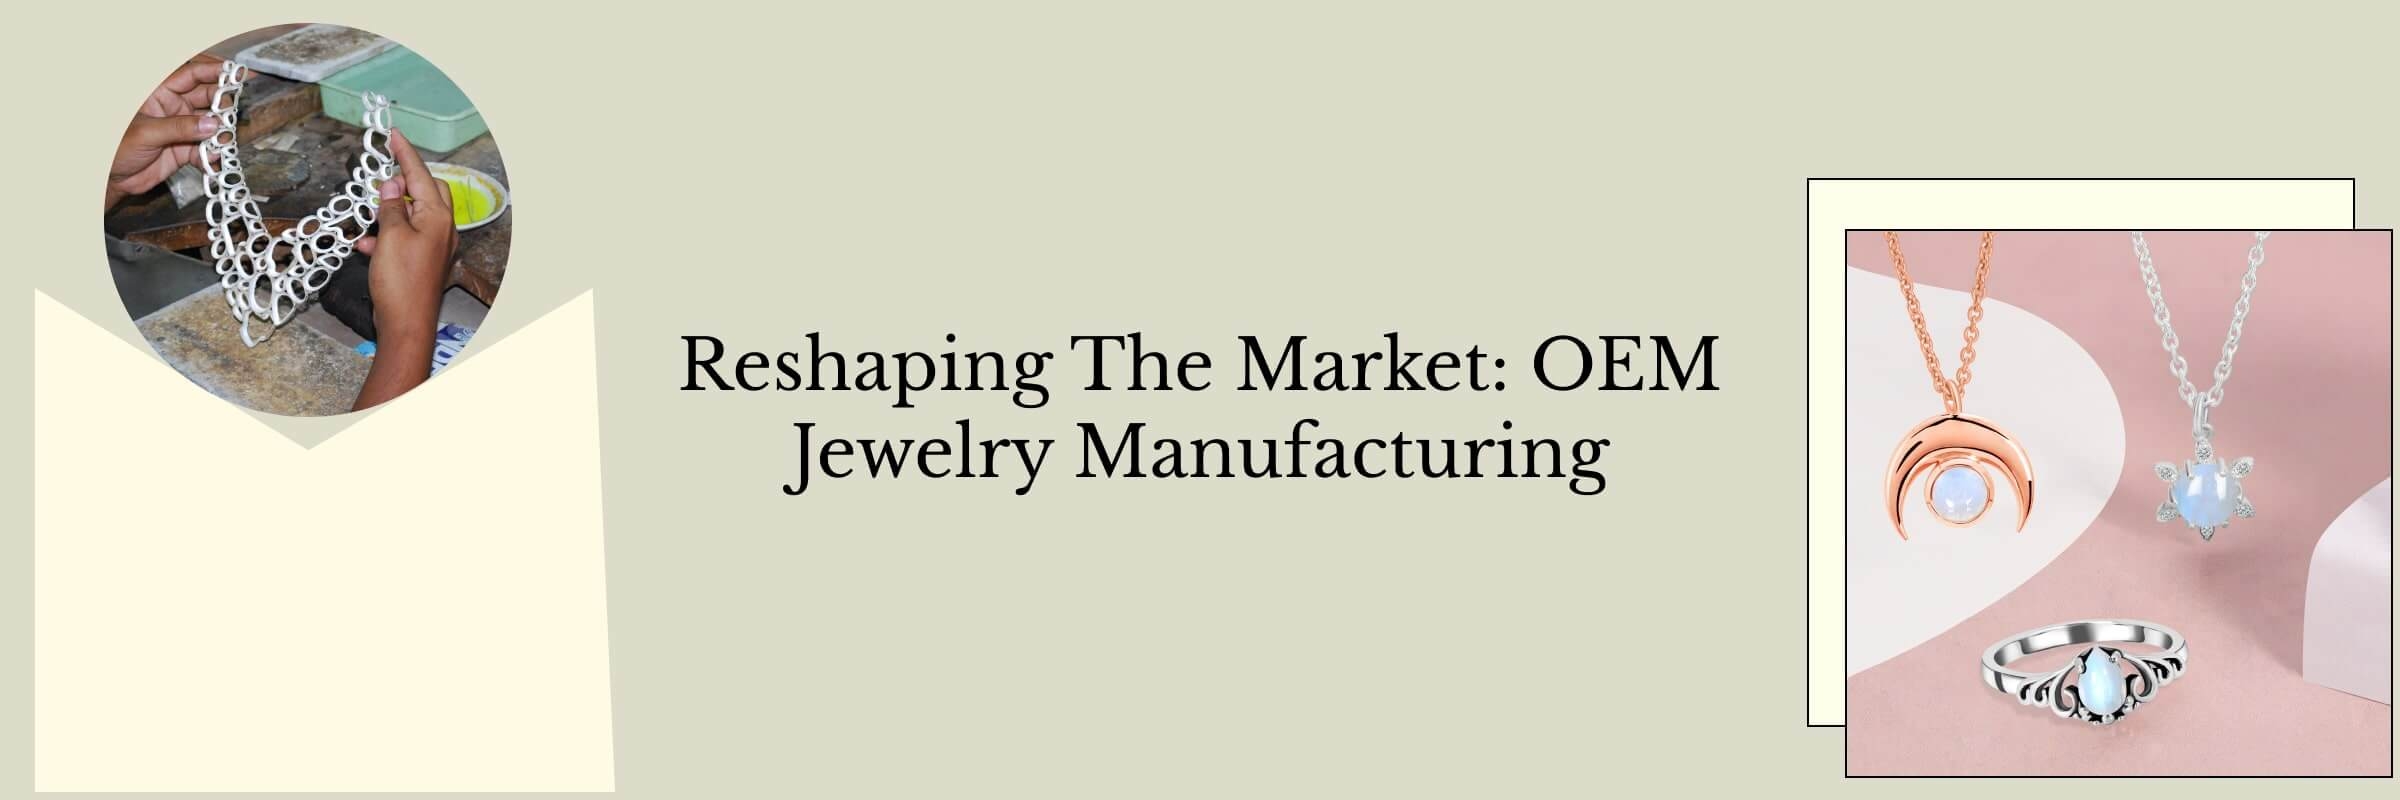 OEM Jewelry Manufacturing's Impact on the Market